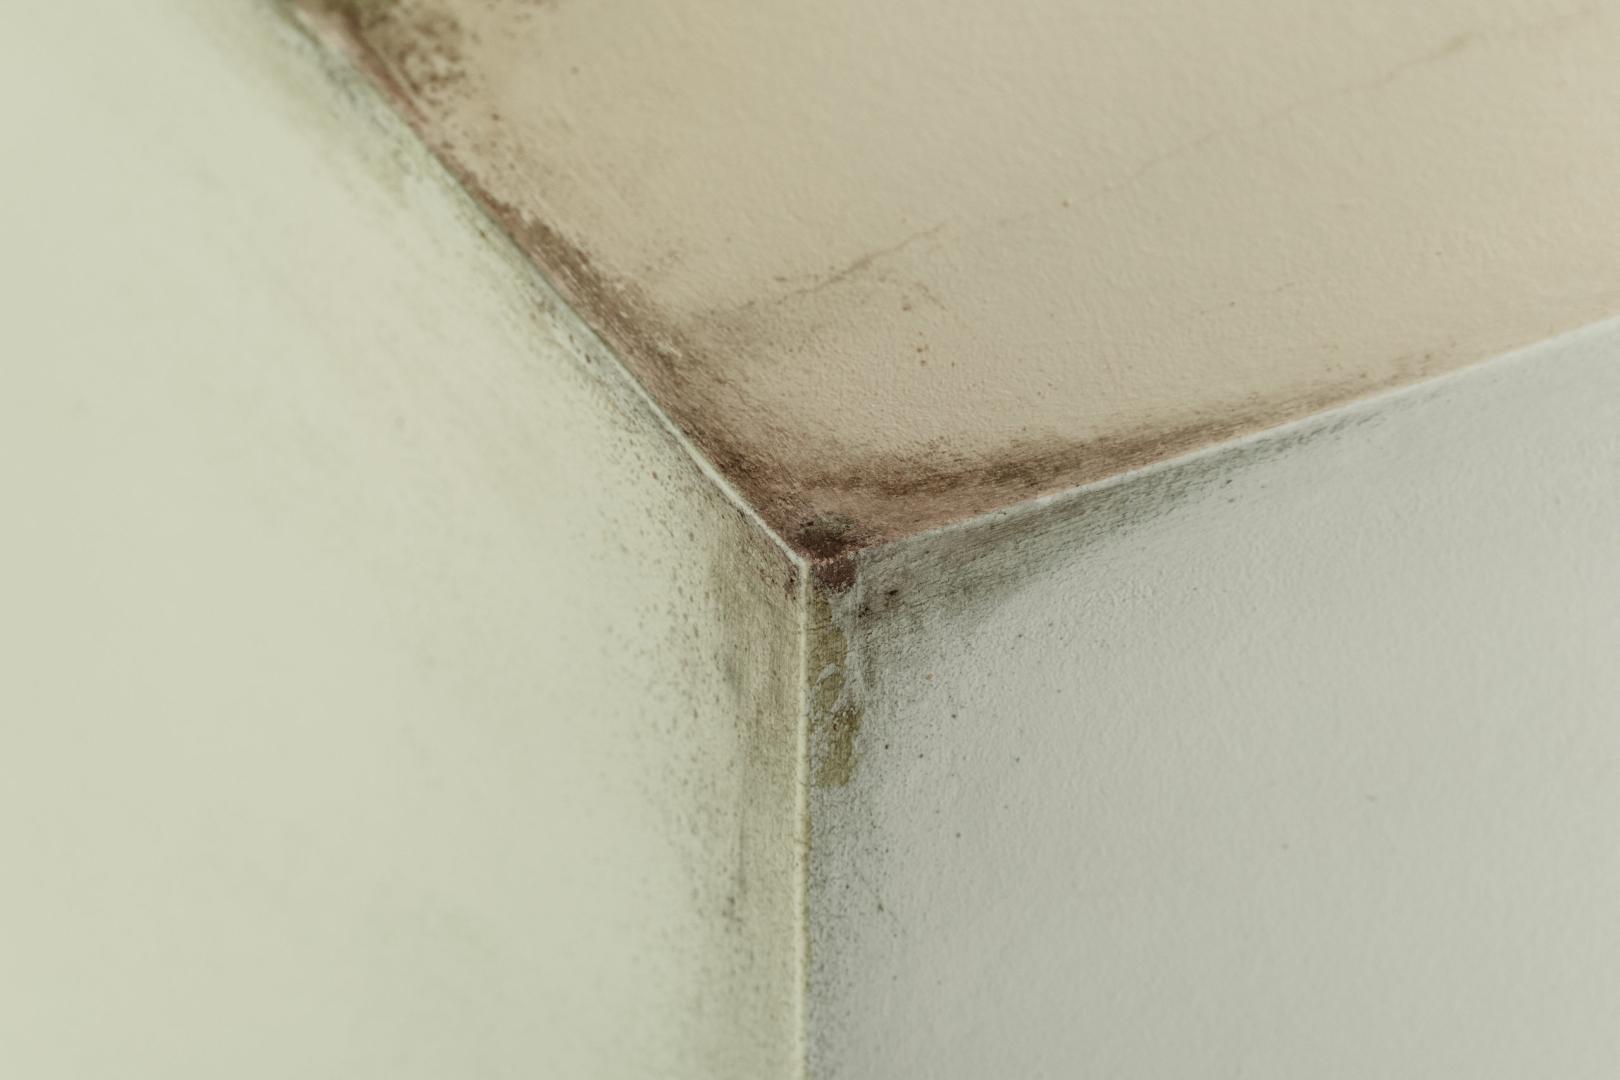 Landlord Responsibilities: Resolving Mould Issues